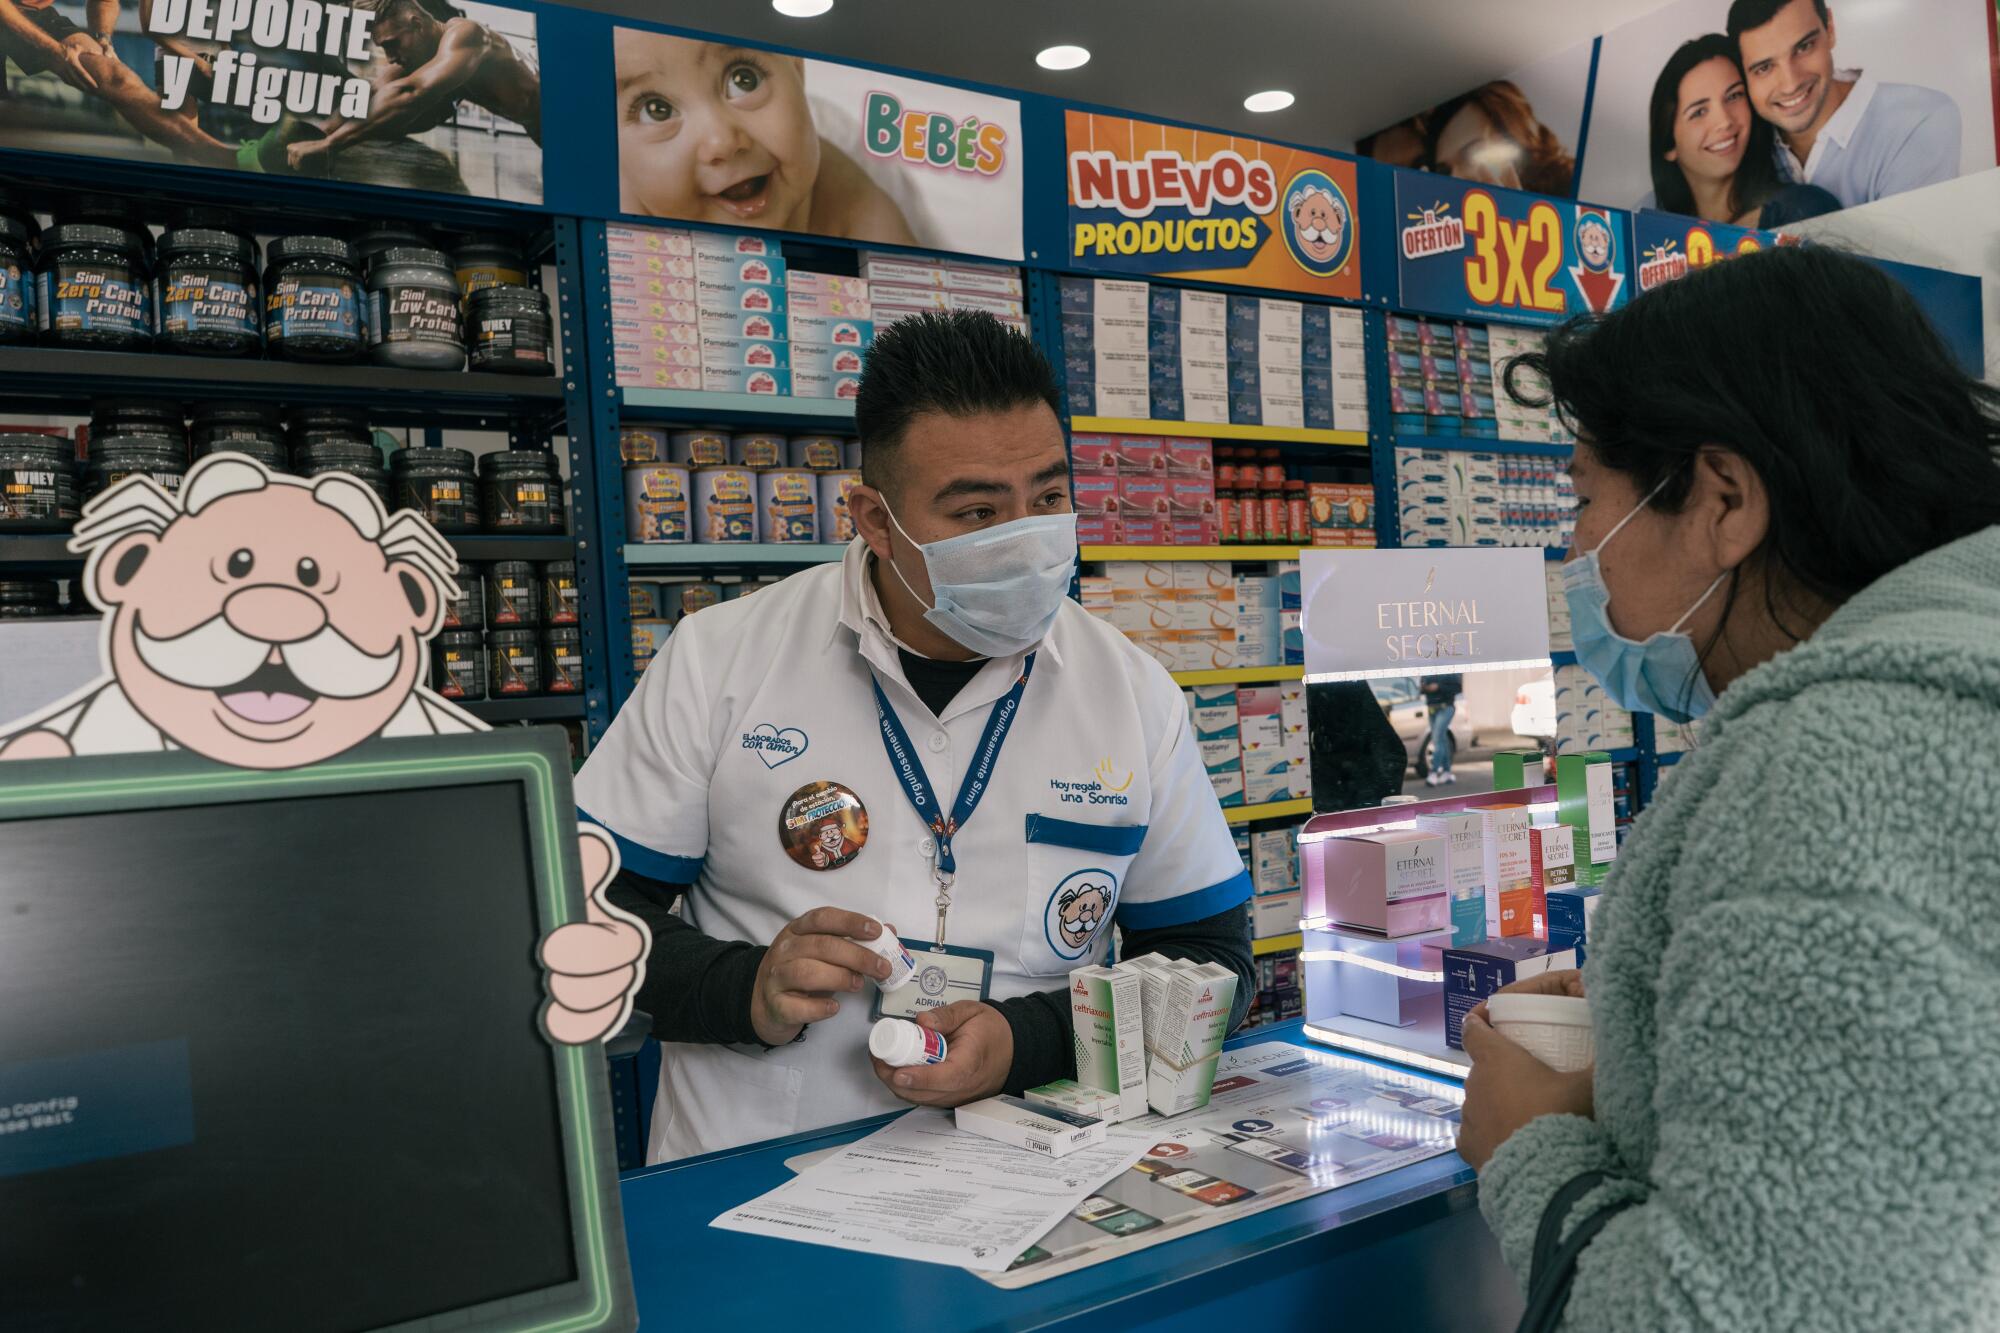 A masked man in white uniform behind a counter speaks to a woman near a cartoon display of man with white hair and mustache